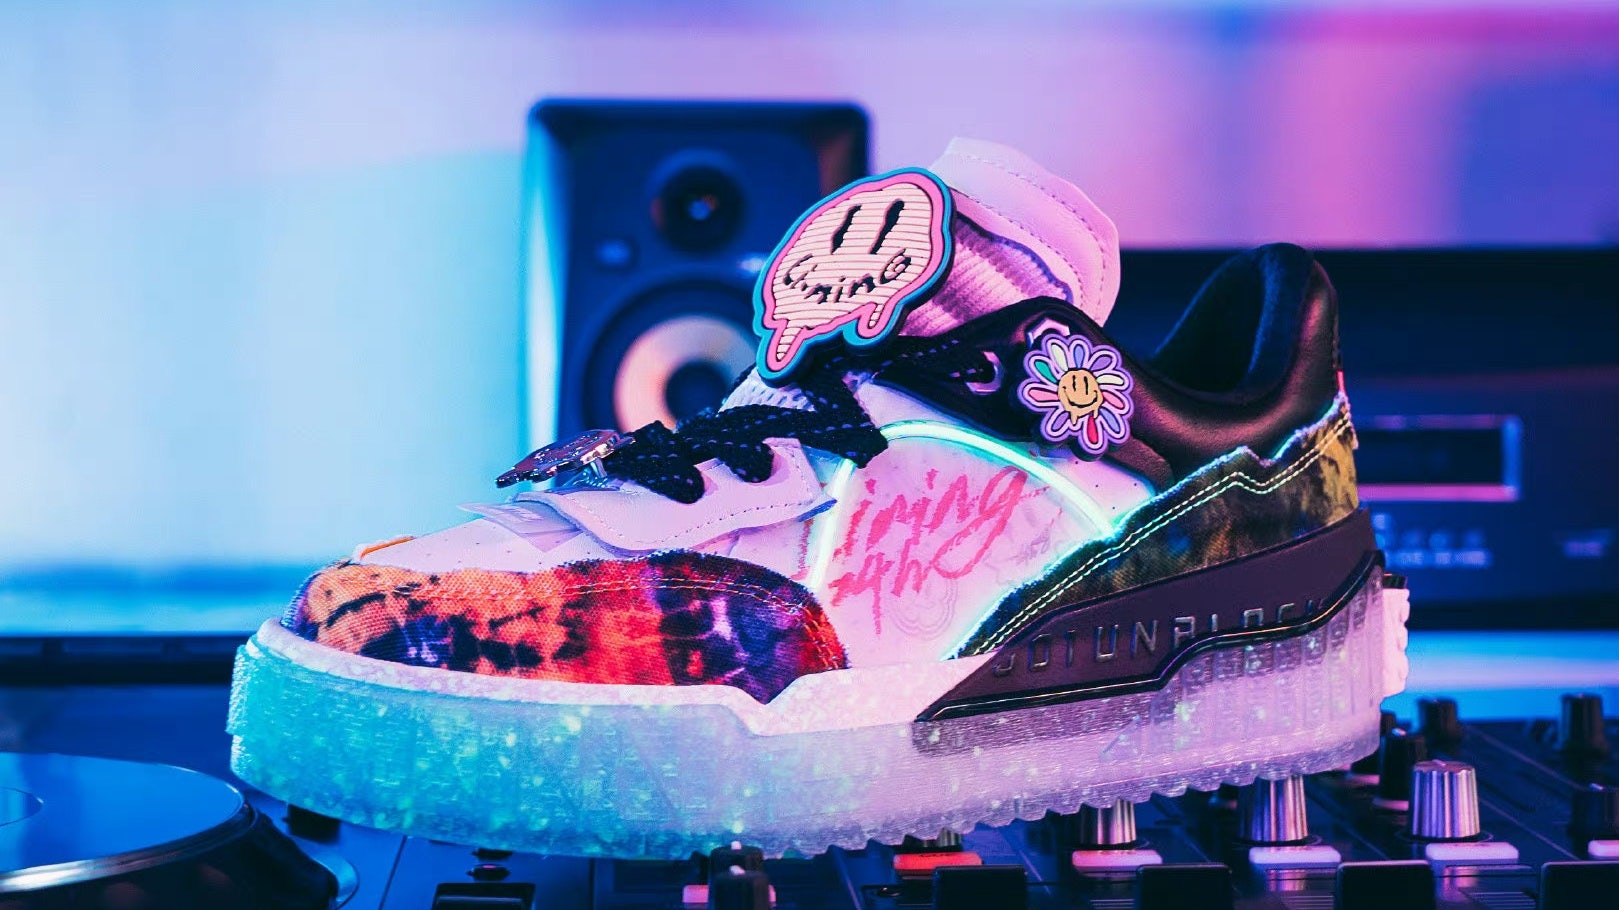 With China's sneaker scene challenging the longtime dominance of western brands, collaborations and limited drops won't be enough to impress. Photo: Li-Ning